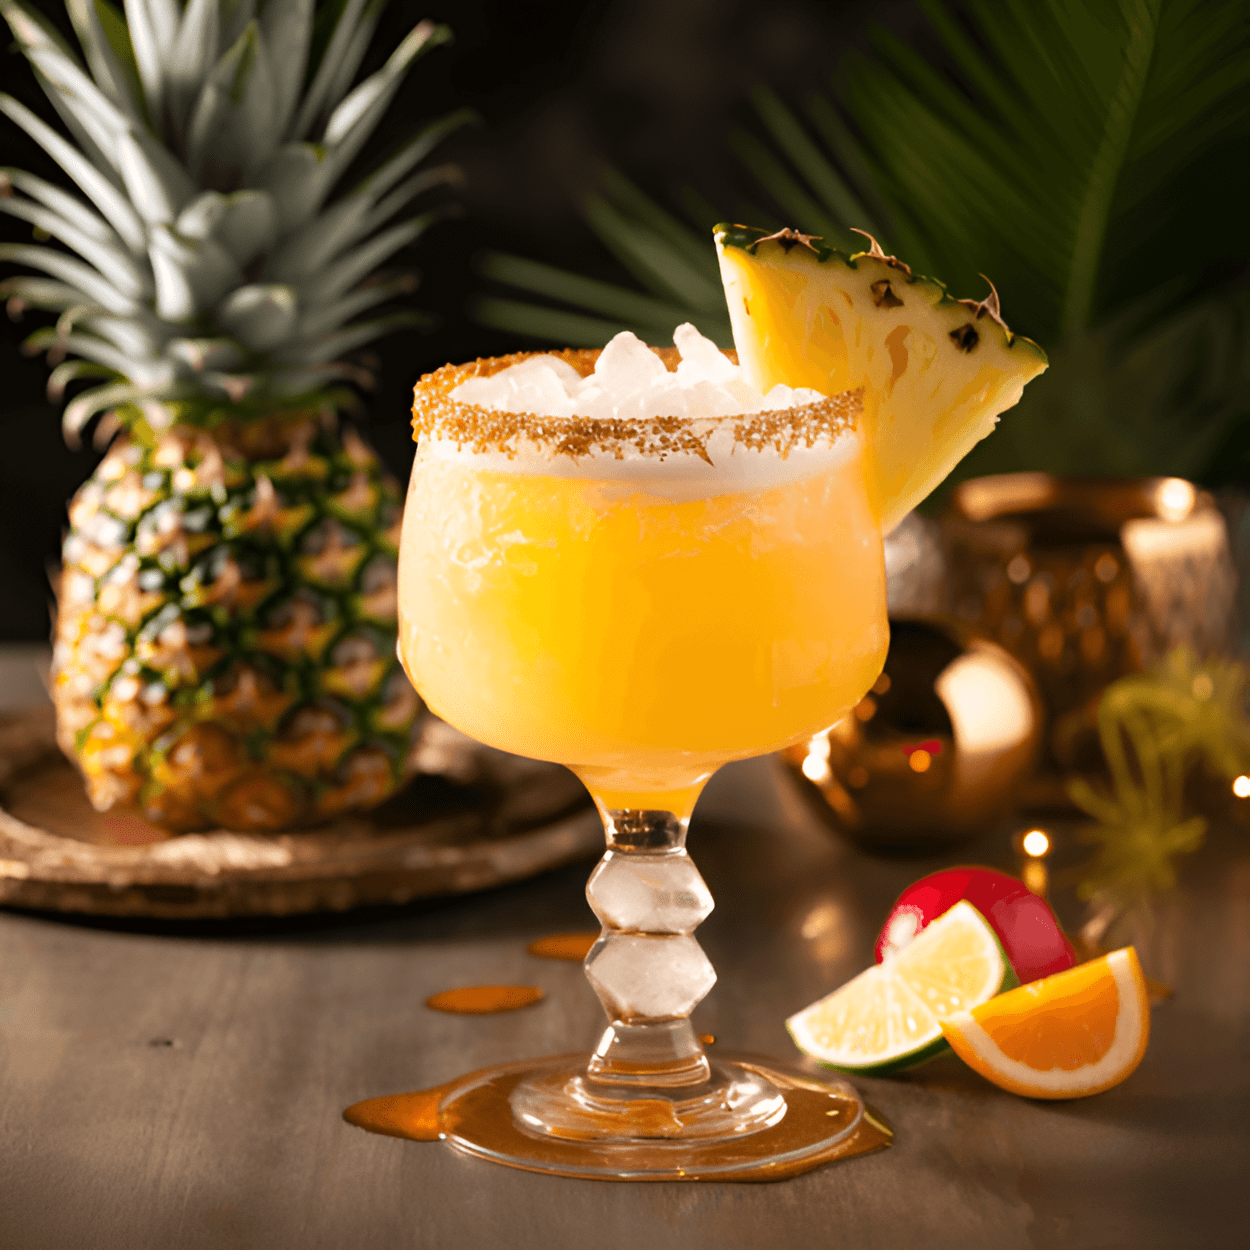 Shipwreck Cocktail Recipe - The Shipwreck cocktail is a delightful blend of sweet and sour, with a strong rum base. The pineapple juice adds a tropical sweetness, while the lime juice gives it a tangy kick. The hint of honey adds a subtle sweetness that balances out the tartness of the lime.